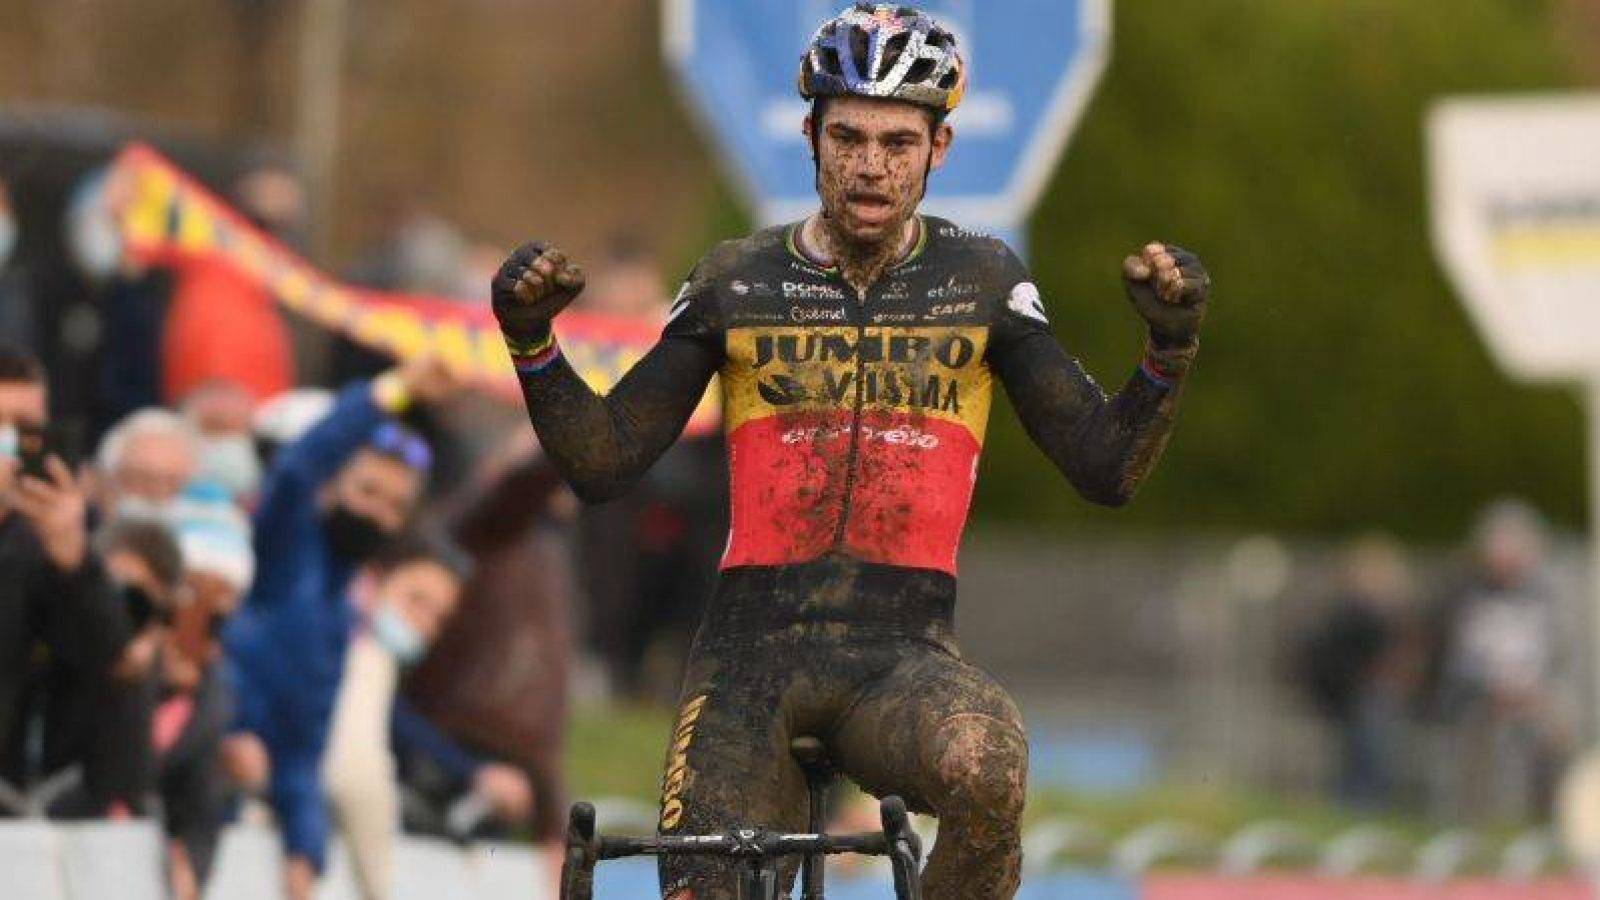 Belgian Wout Van Aert celebrates as he crosses the finish line to win the men elite race of the GP Sven Nys, the fourth stage (4/8) in the Trofee Veldrijden Cyclocross competition, Saturday 01 January 2022 in Baal, Belgium.
BELGA PHOTO DAVID STOCKMAN